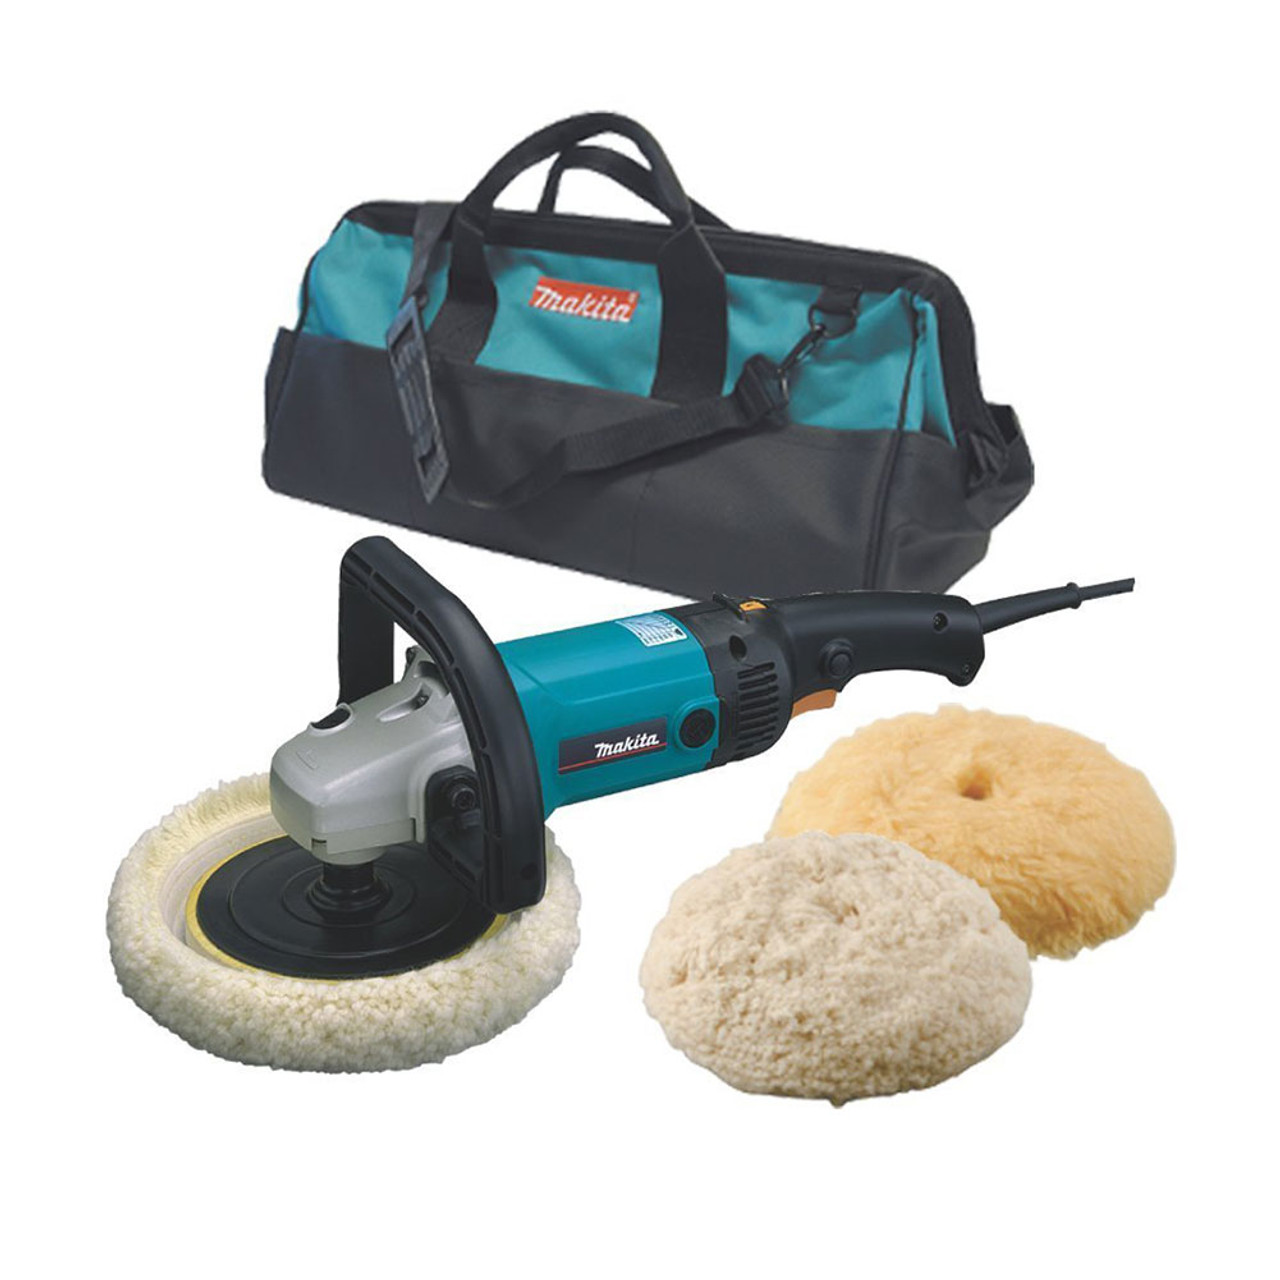 Makita 7-Inch Electric Polisher with Free Gifts